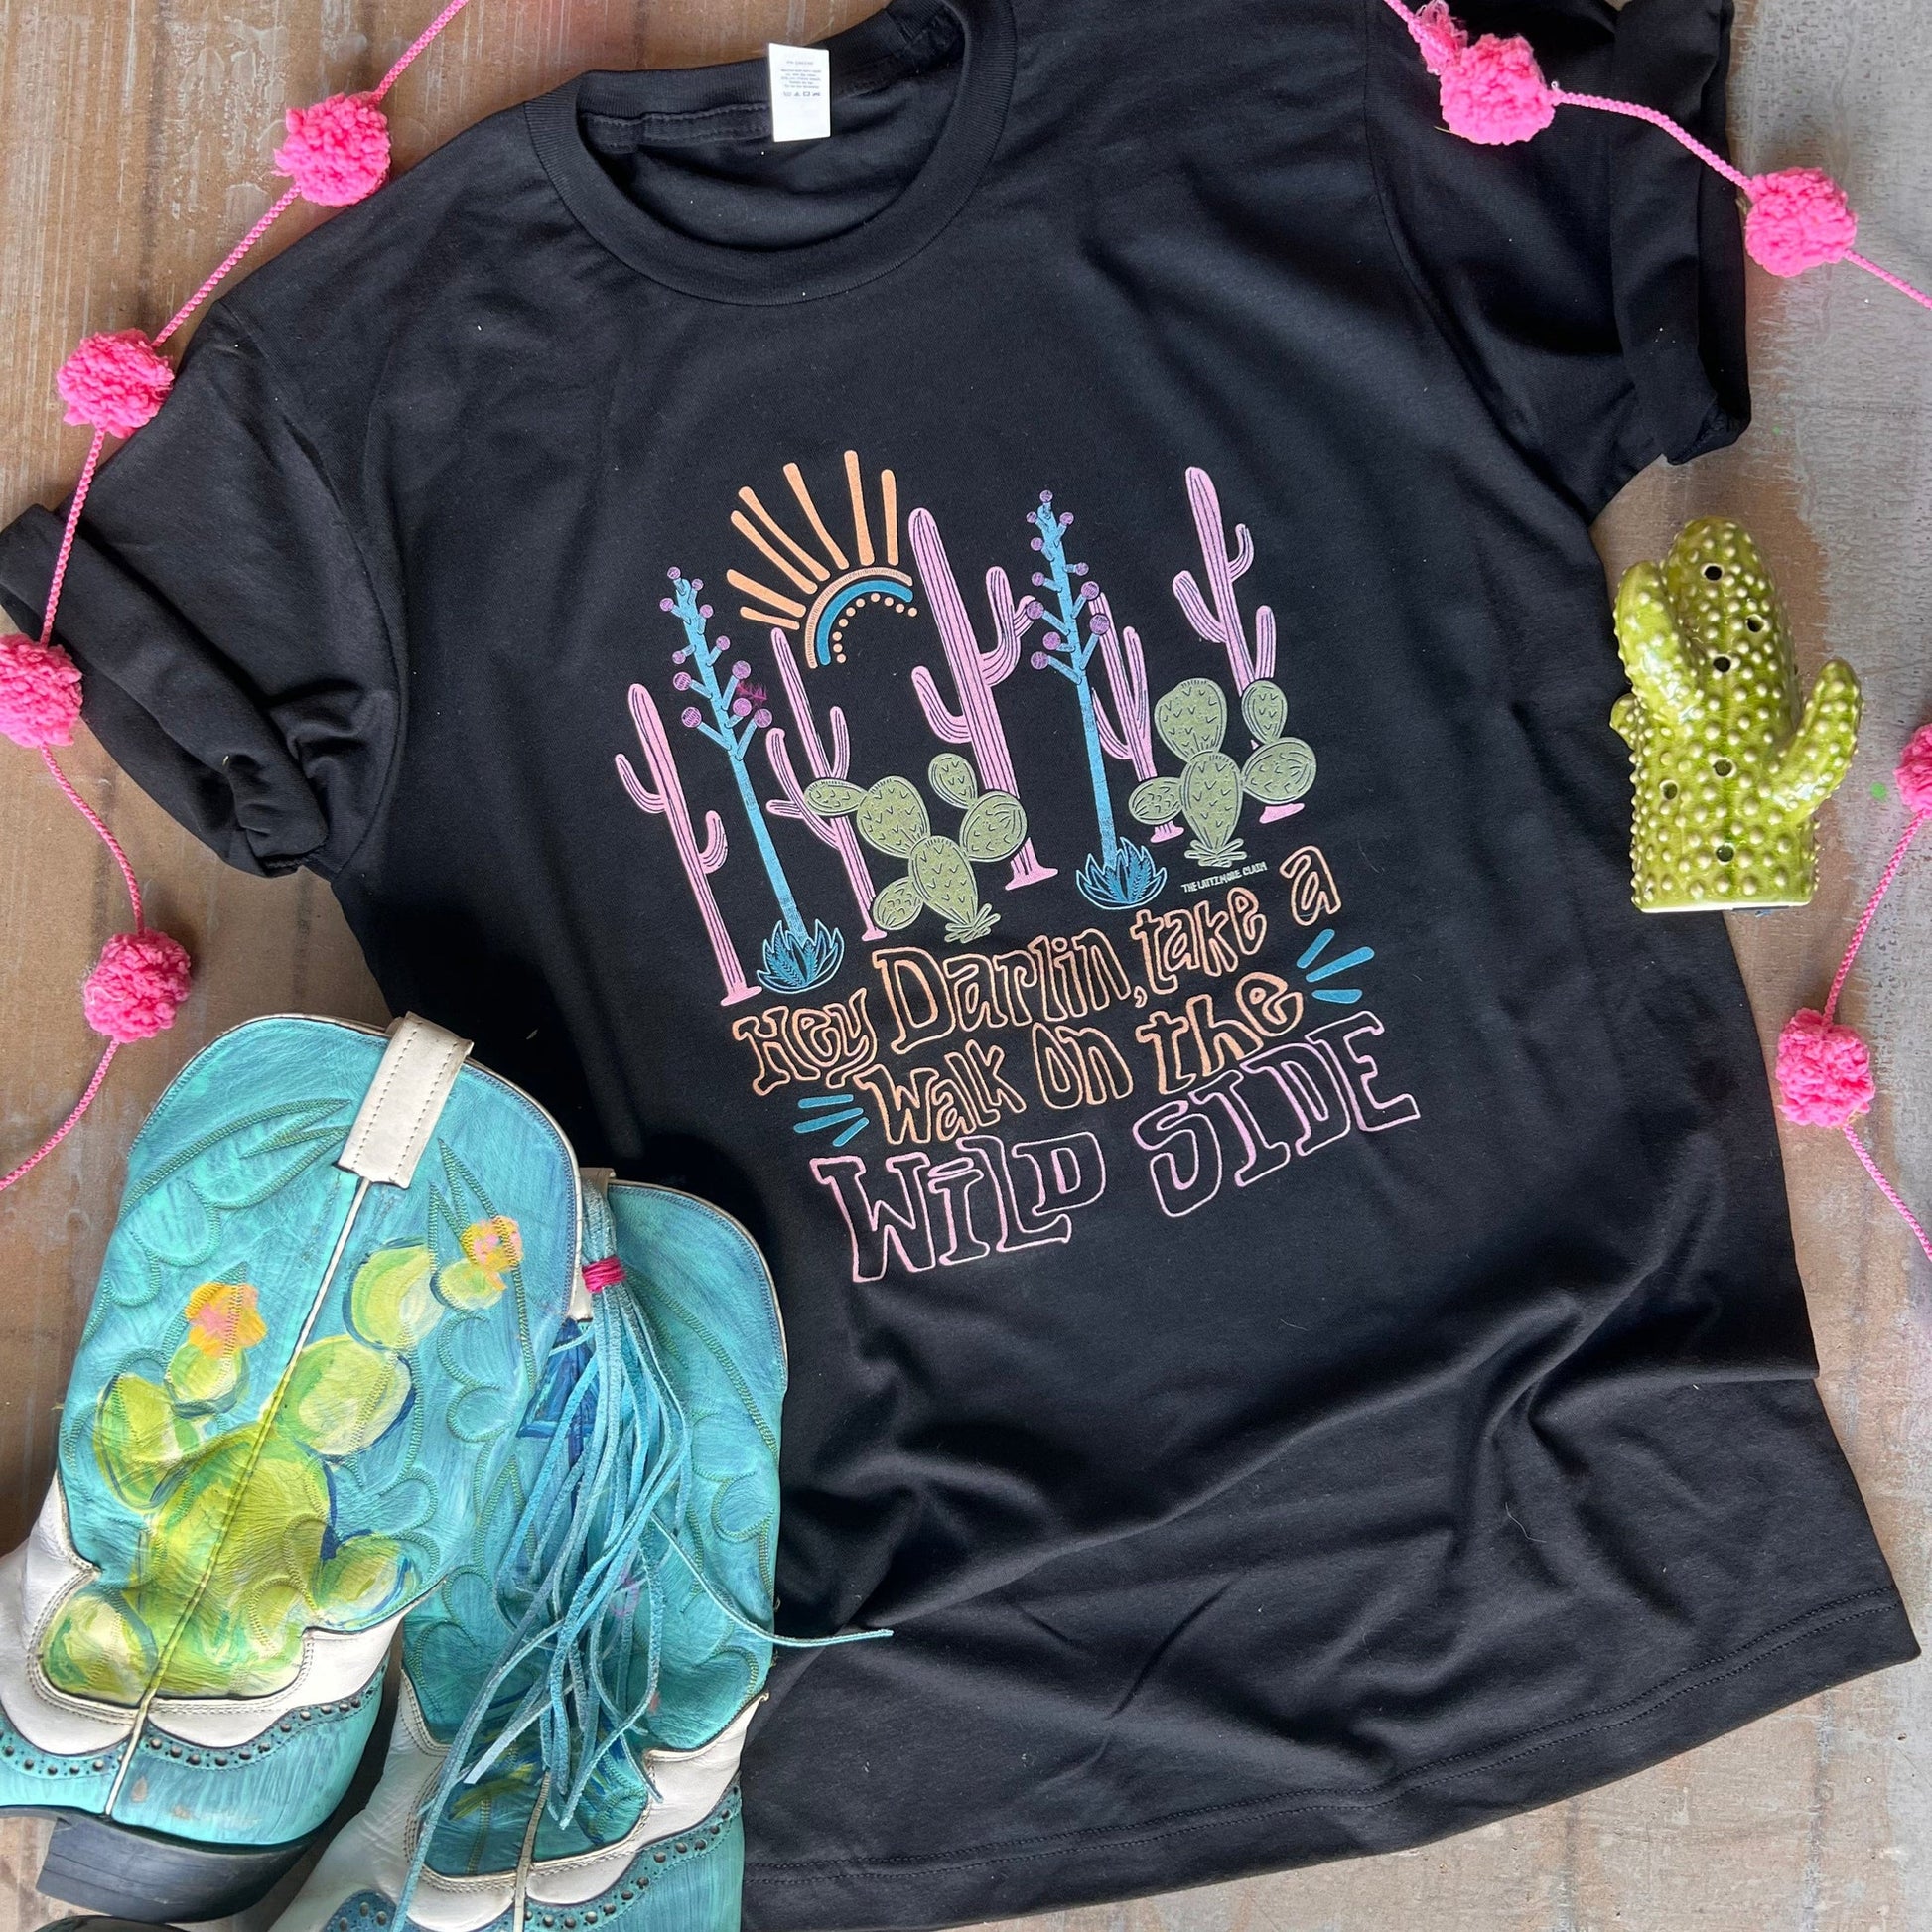 Take A Walk On The Wild SideTee - cactus, cactus design, cactus print, cowgirl, cowgirl style, cowgirlstyle, fringe, shirt, shirts, southwestern, t, te, tee, texas, western, westerngraphictee - Shirts & Tops - Baha Ranch Western Wear